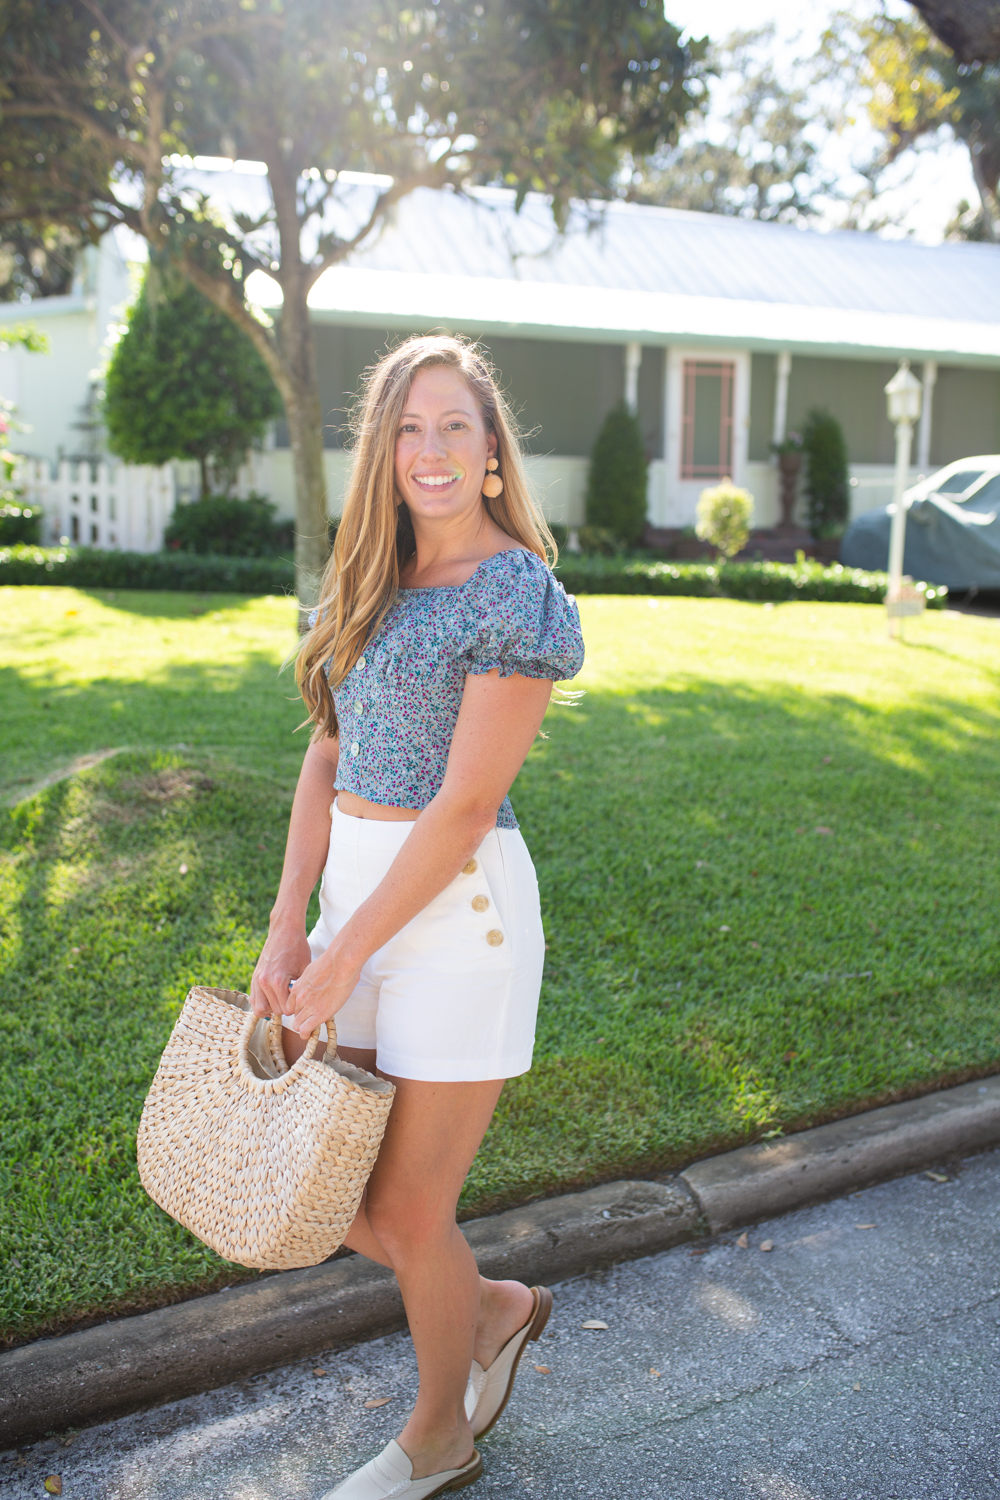 Puff Sleeve Floral Top / Summer Outfit Inspiration / Pretty Outfit / Preppy Style / Classic White Shorts / Sailor Style / Casual Summer Outfit - Sunshine Style, A Florida Fashion and Lifestyle Blog #preppy #fashion #summer #summerstyle #summeroutfit #coastal